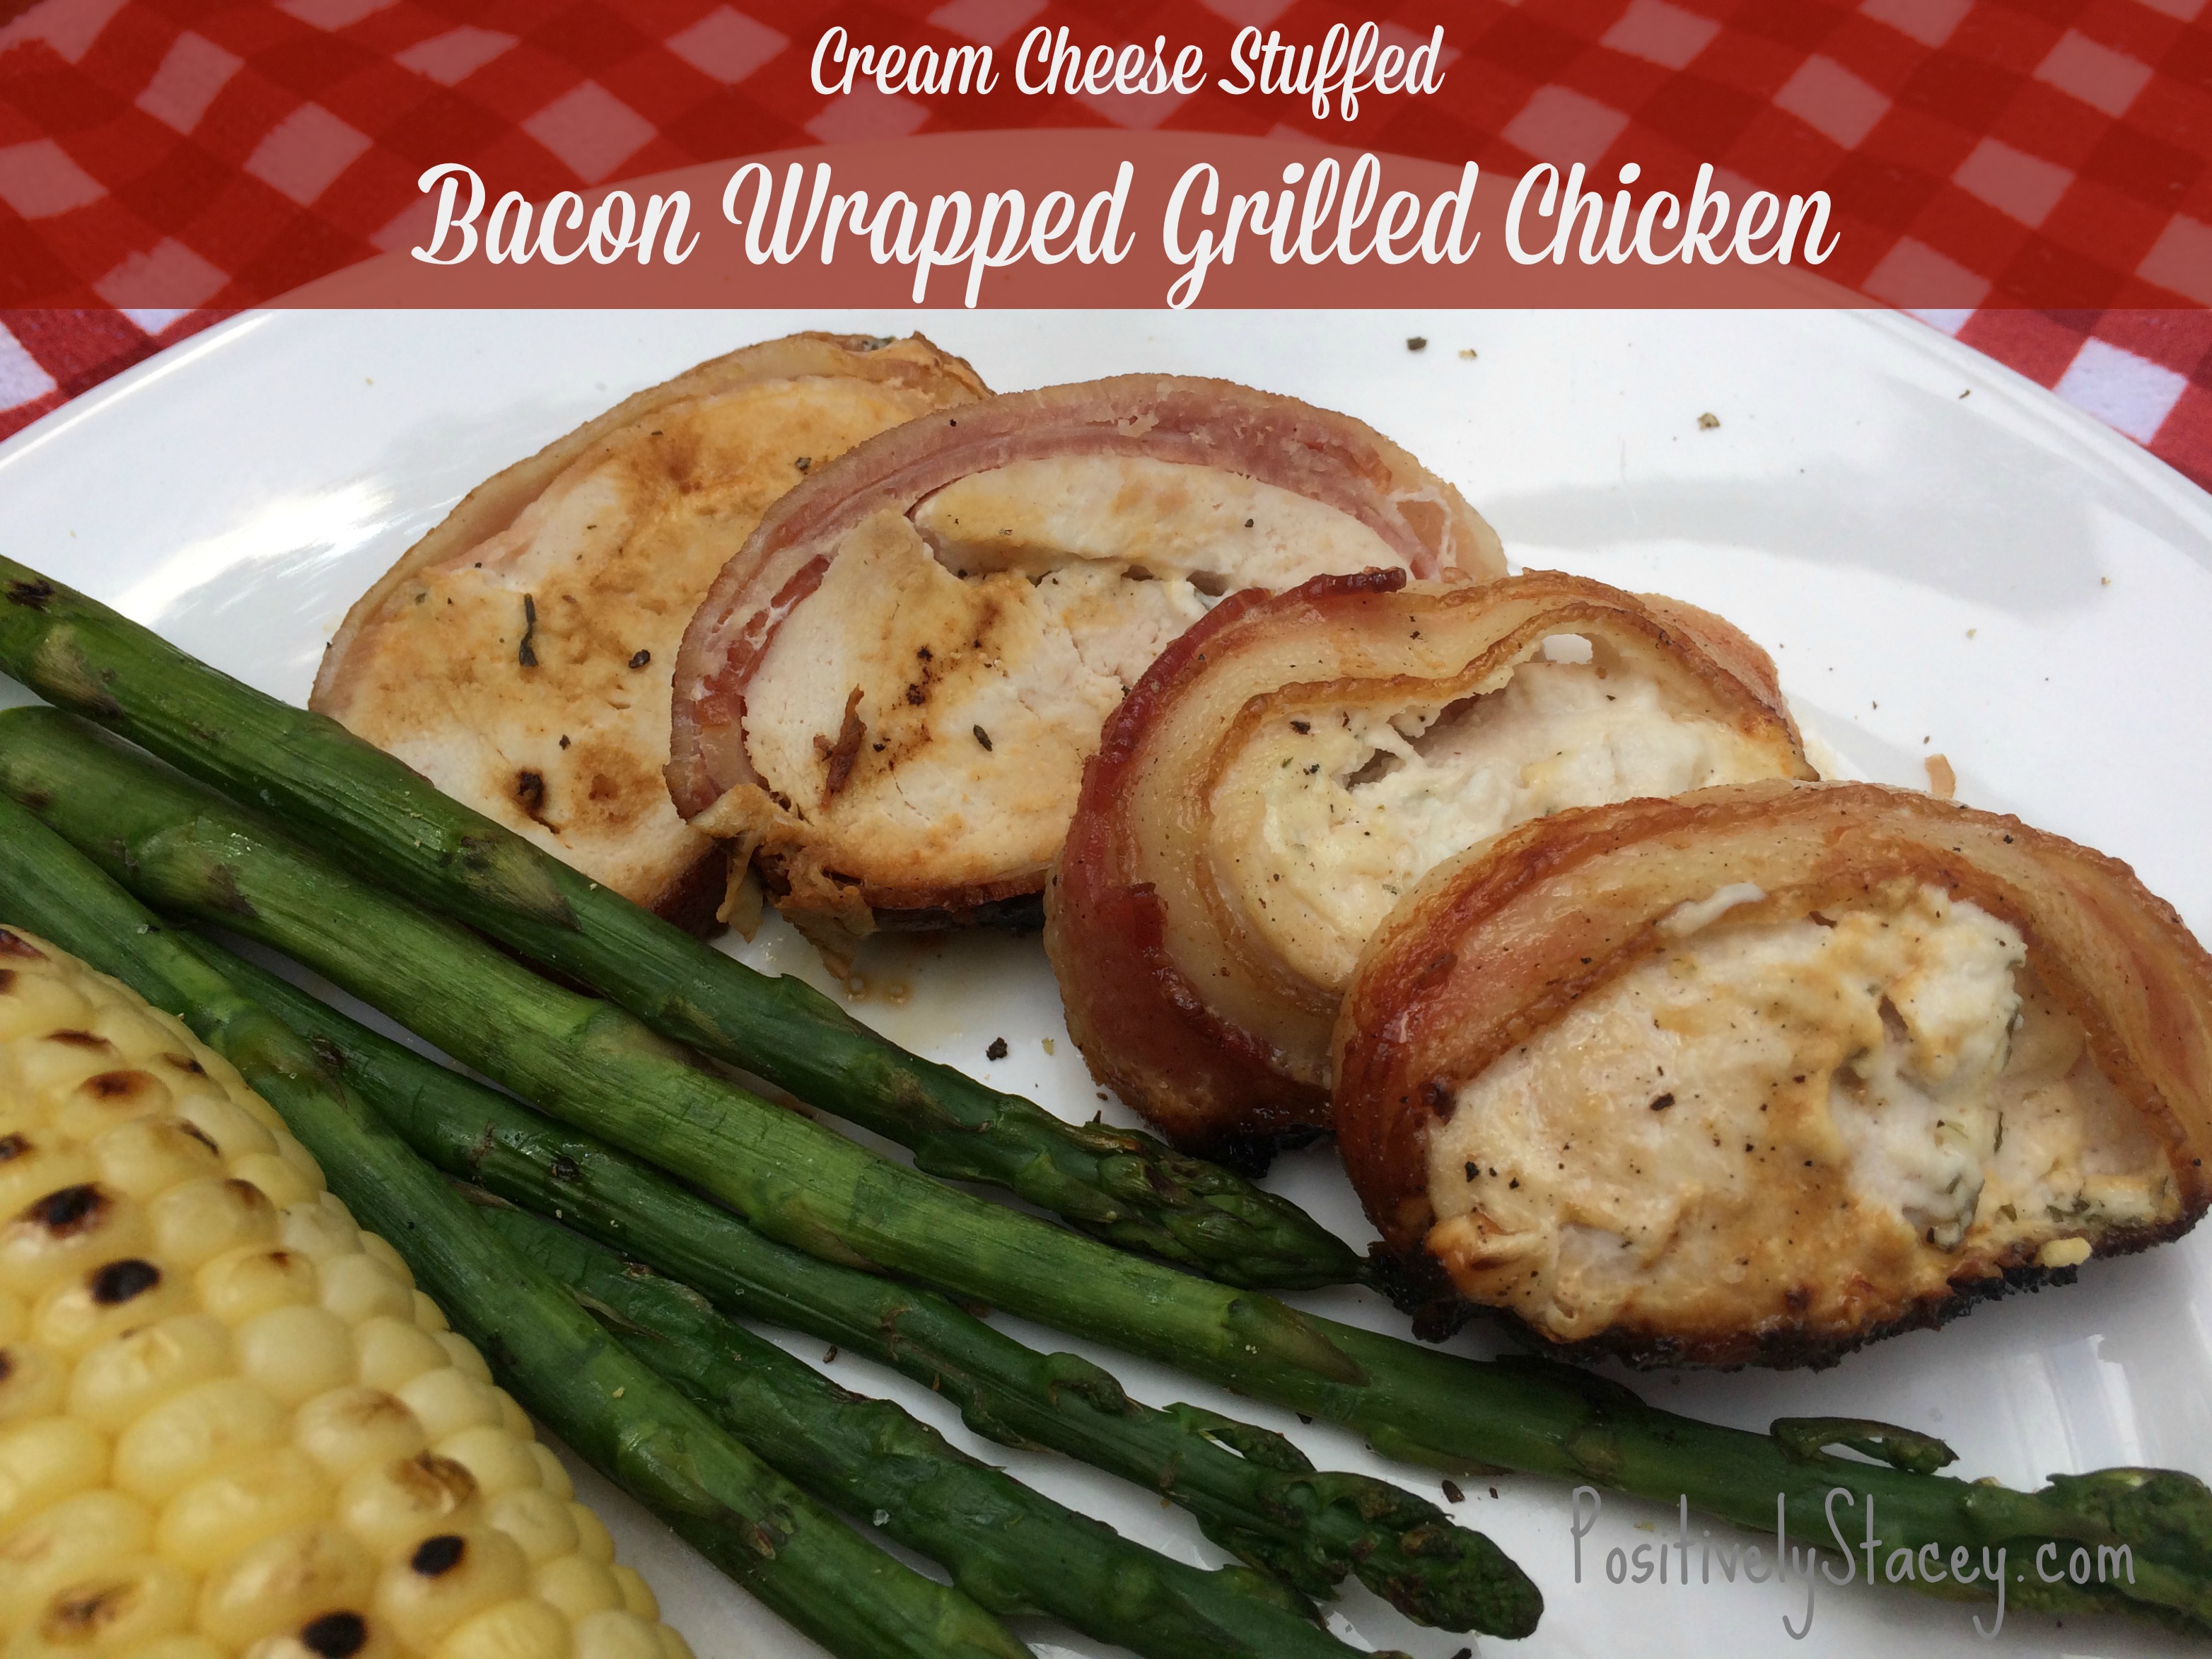 Bacon Wrapped Grilled Chicken